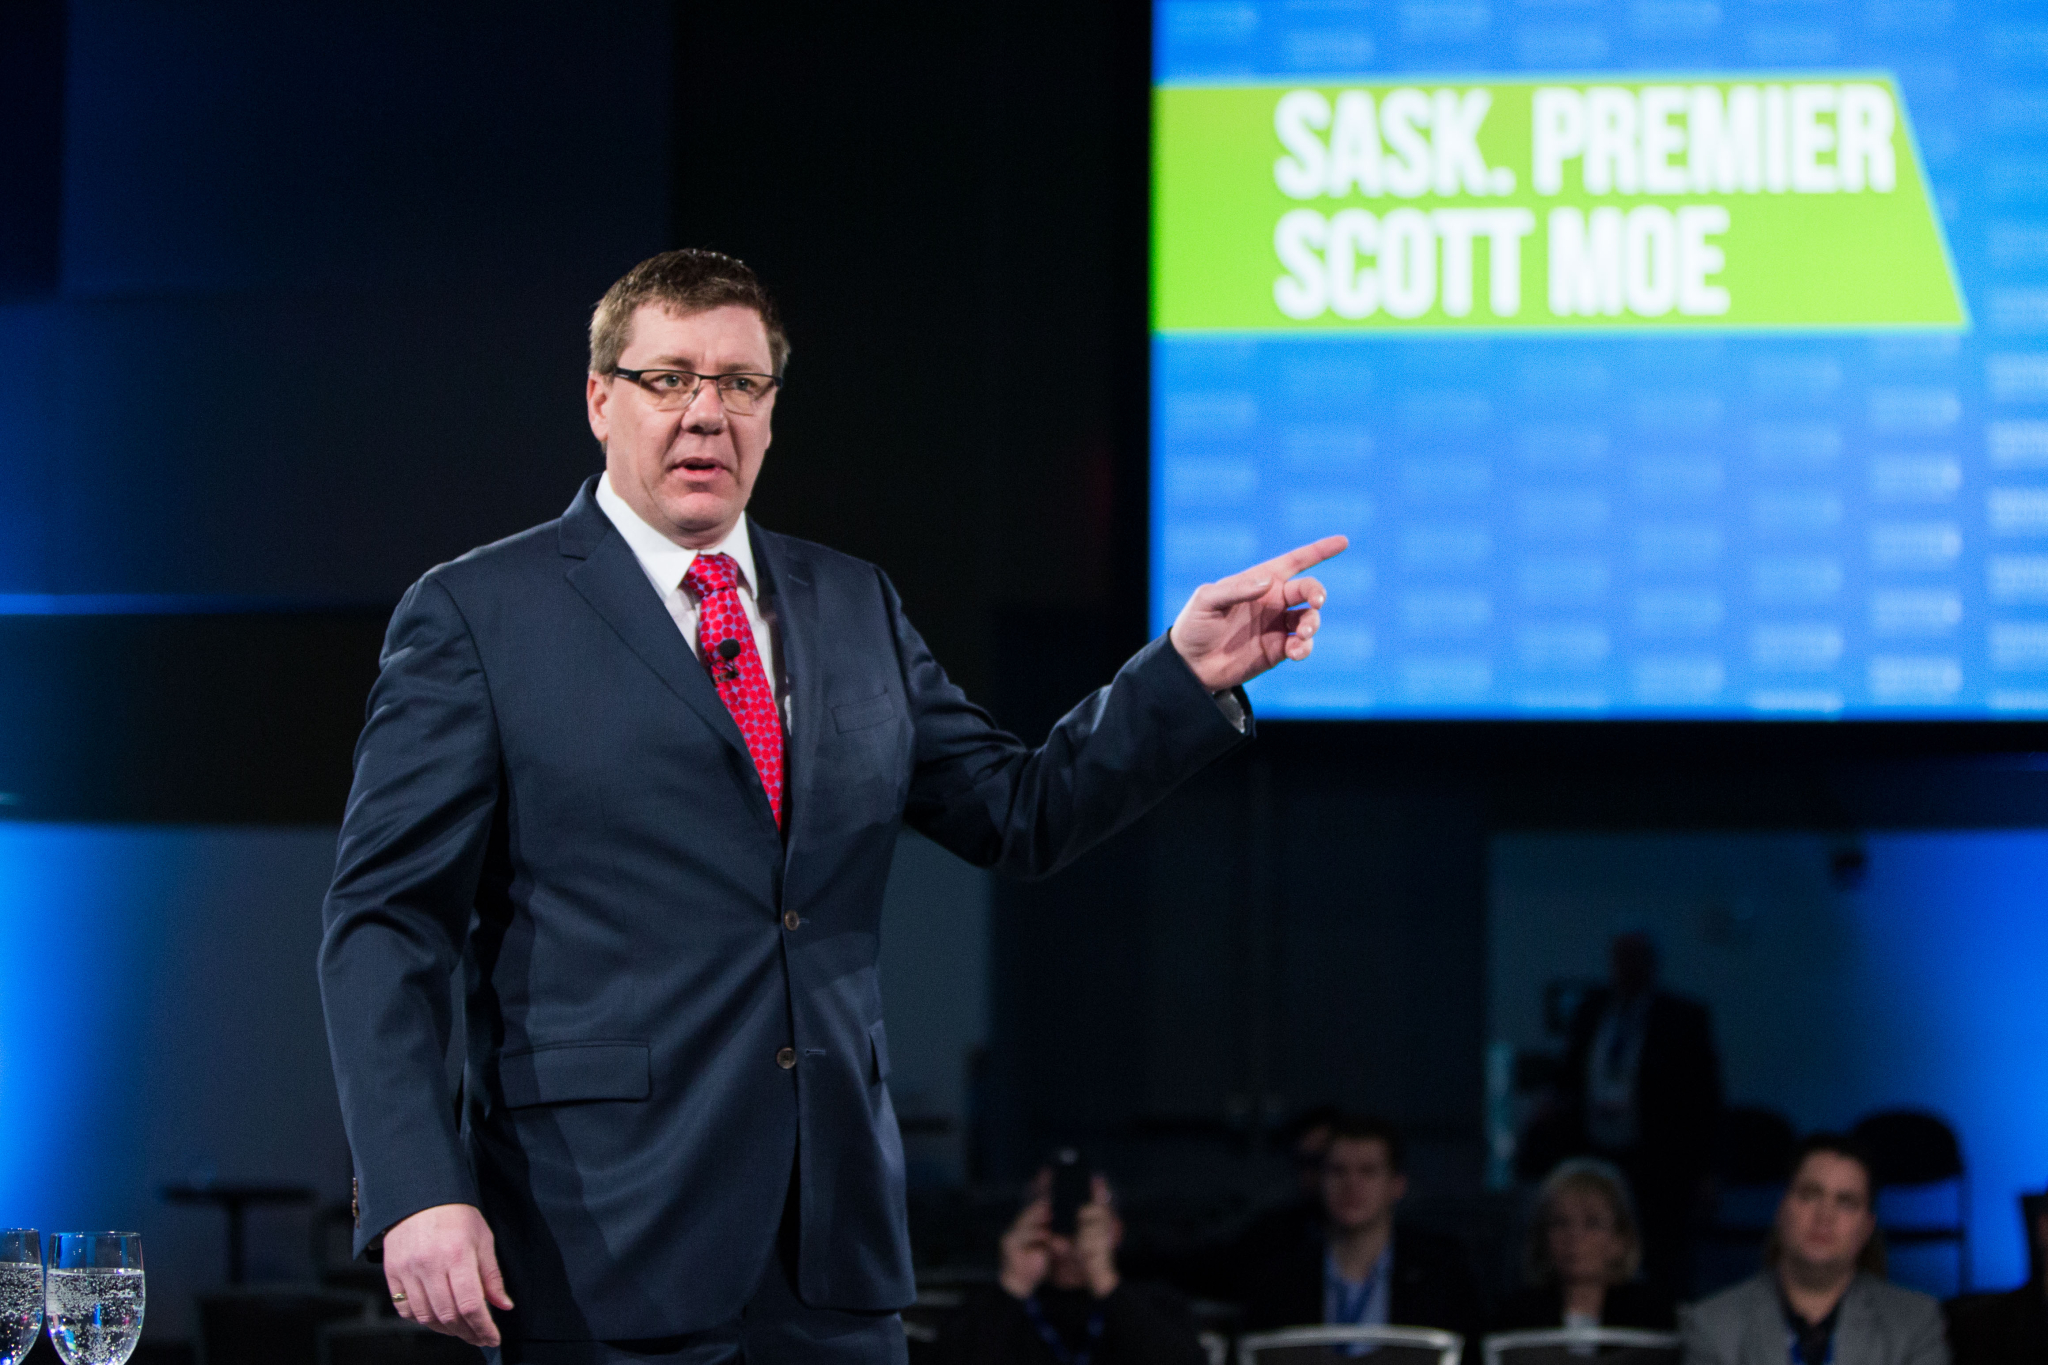 Scott Moe on X: We are coming to a crossroads and at stake is affordable  and reliable power across our province. The federal government's plan is  unaffordable, jeopardizes the reliability of our